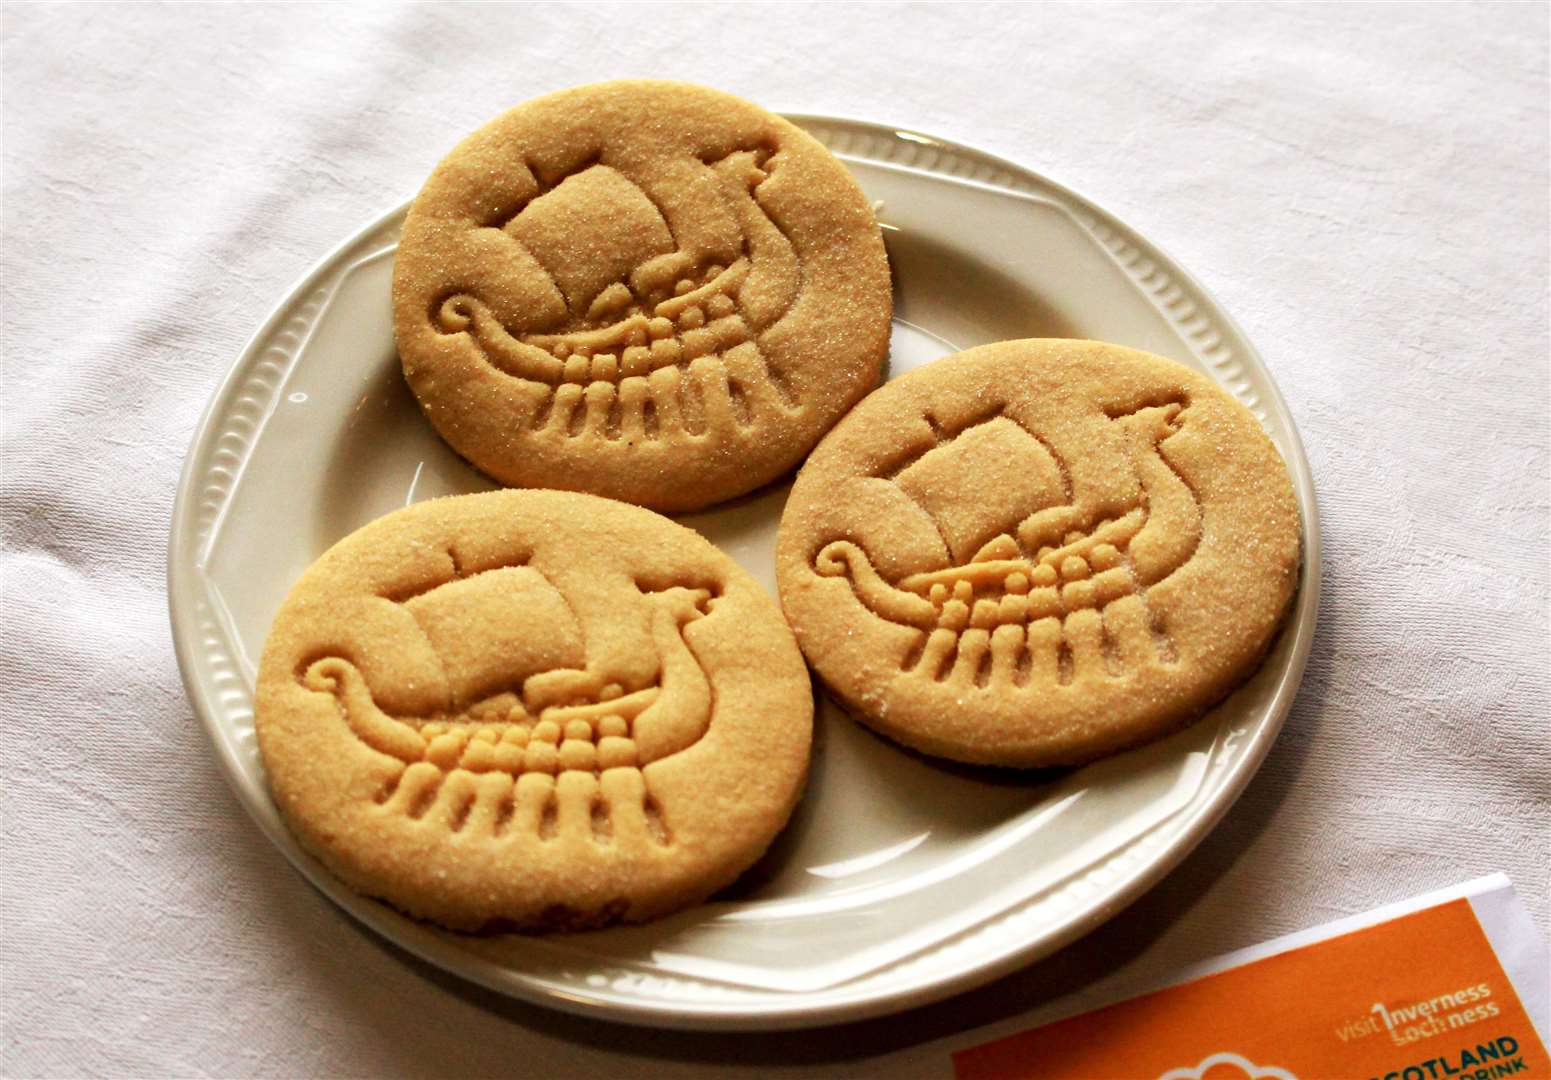 These shortbreads with a Viking longship design went sailing through to the final of last year's Caithness and Sutherland heat.